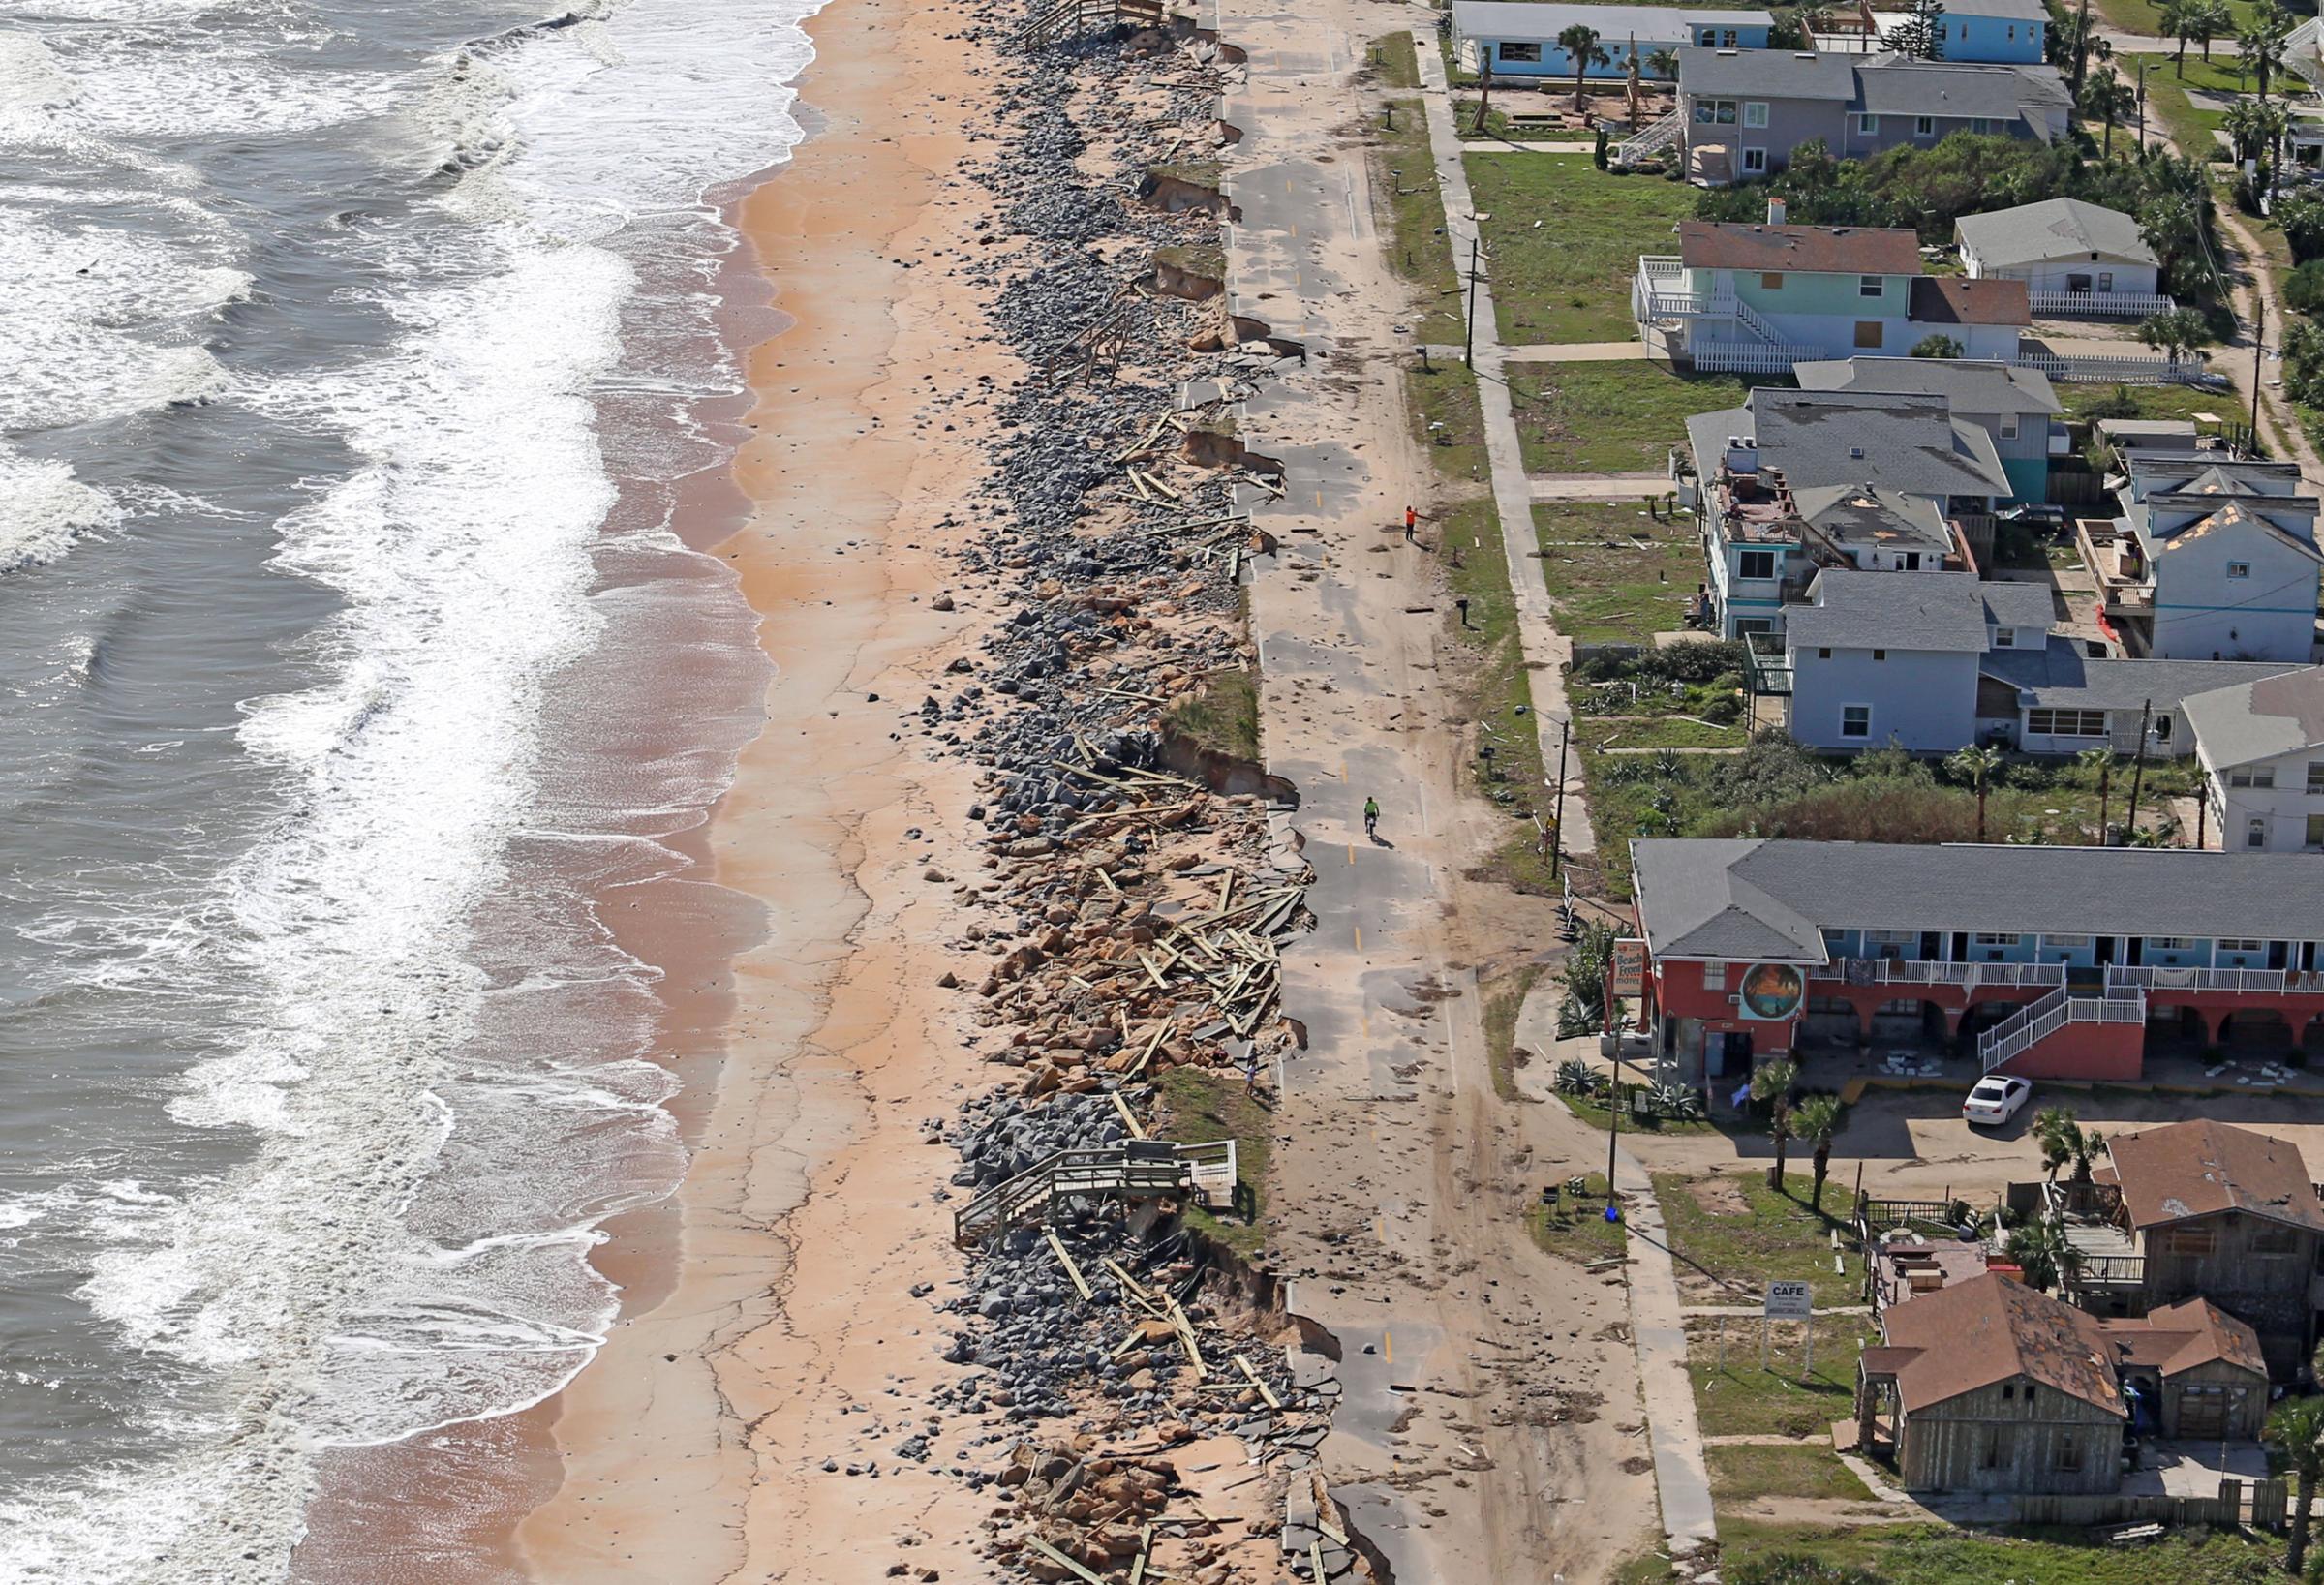 A portion of AIA Highway in Flagler Beach, Fla., closed on Saturday, Oct. 8, 2016, due to the pounding surf from Hurricane Matthew. (Red Huber/Orlando Sentinel/TNS via Getty Images)